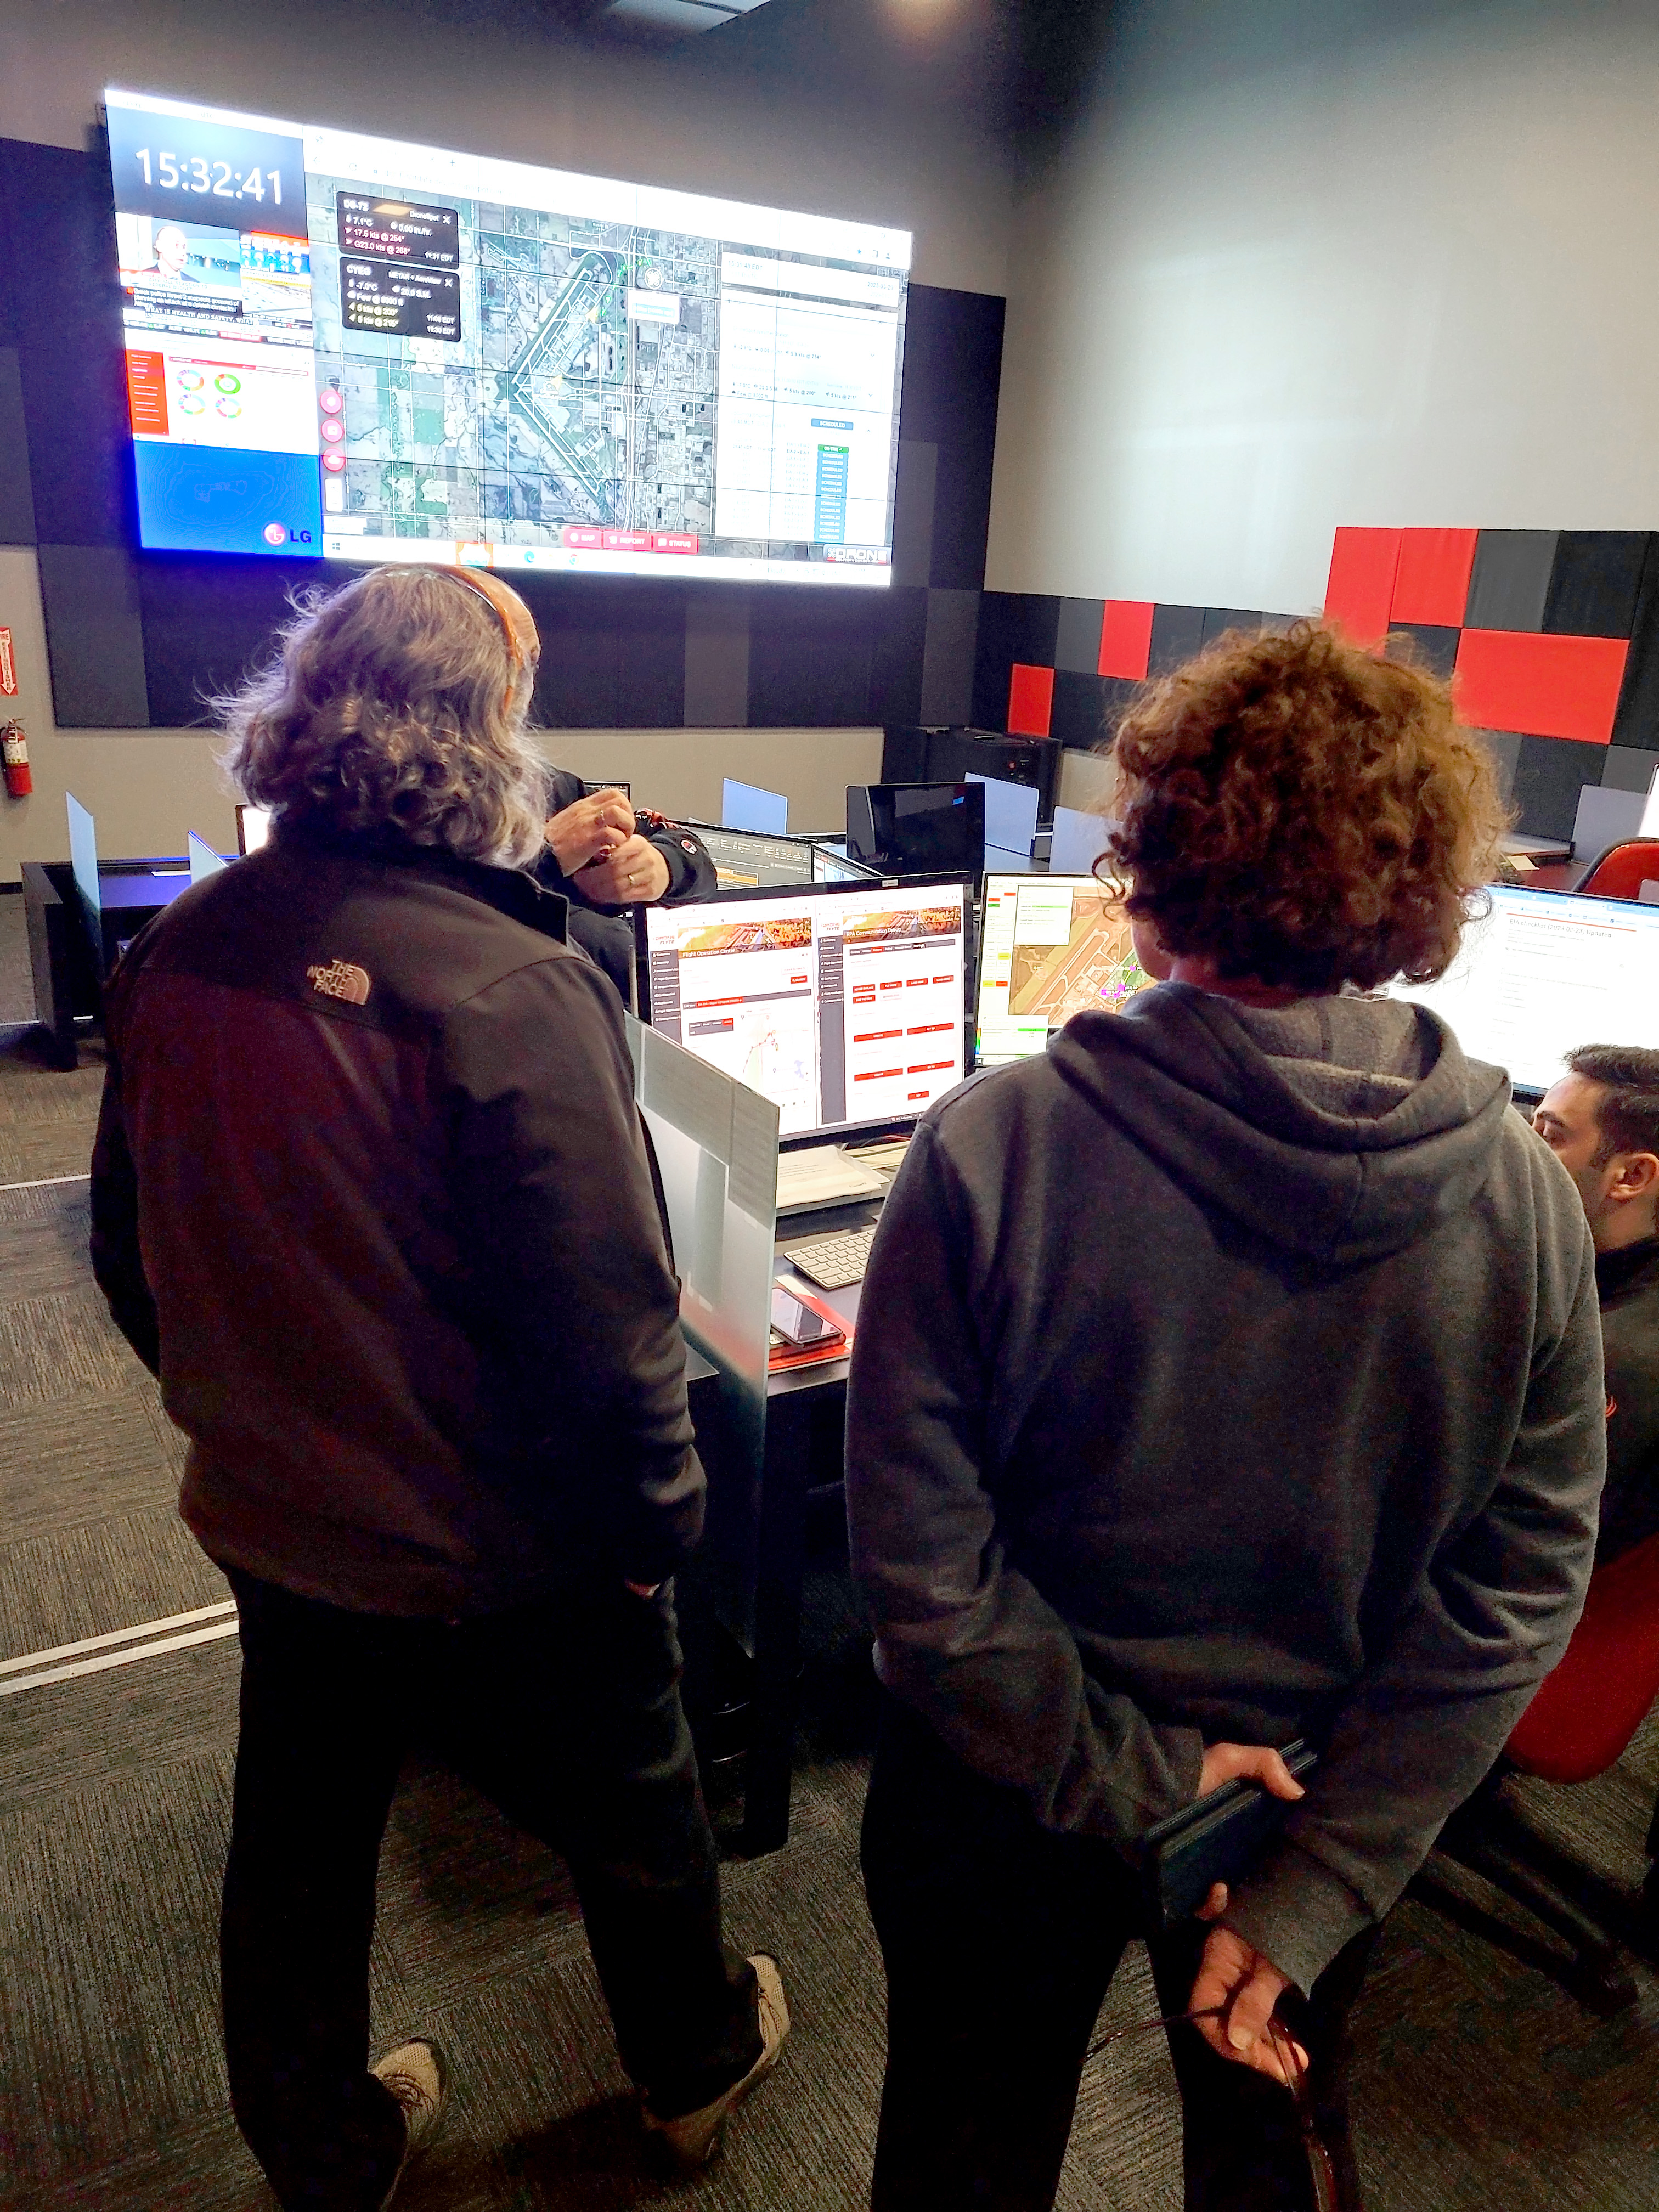 CNSC inspectors overseeing activities from the control room.